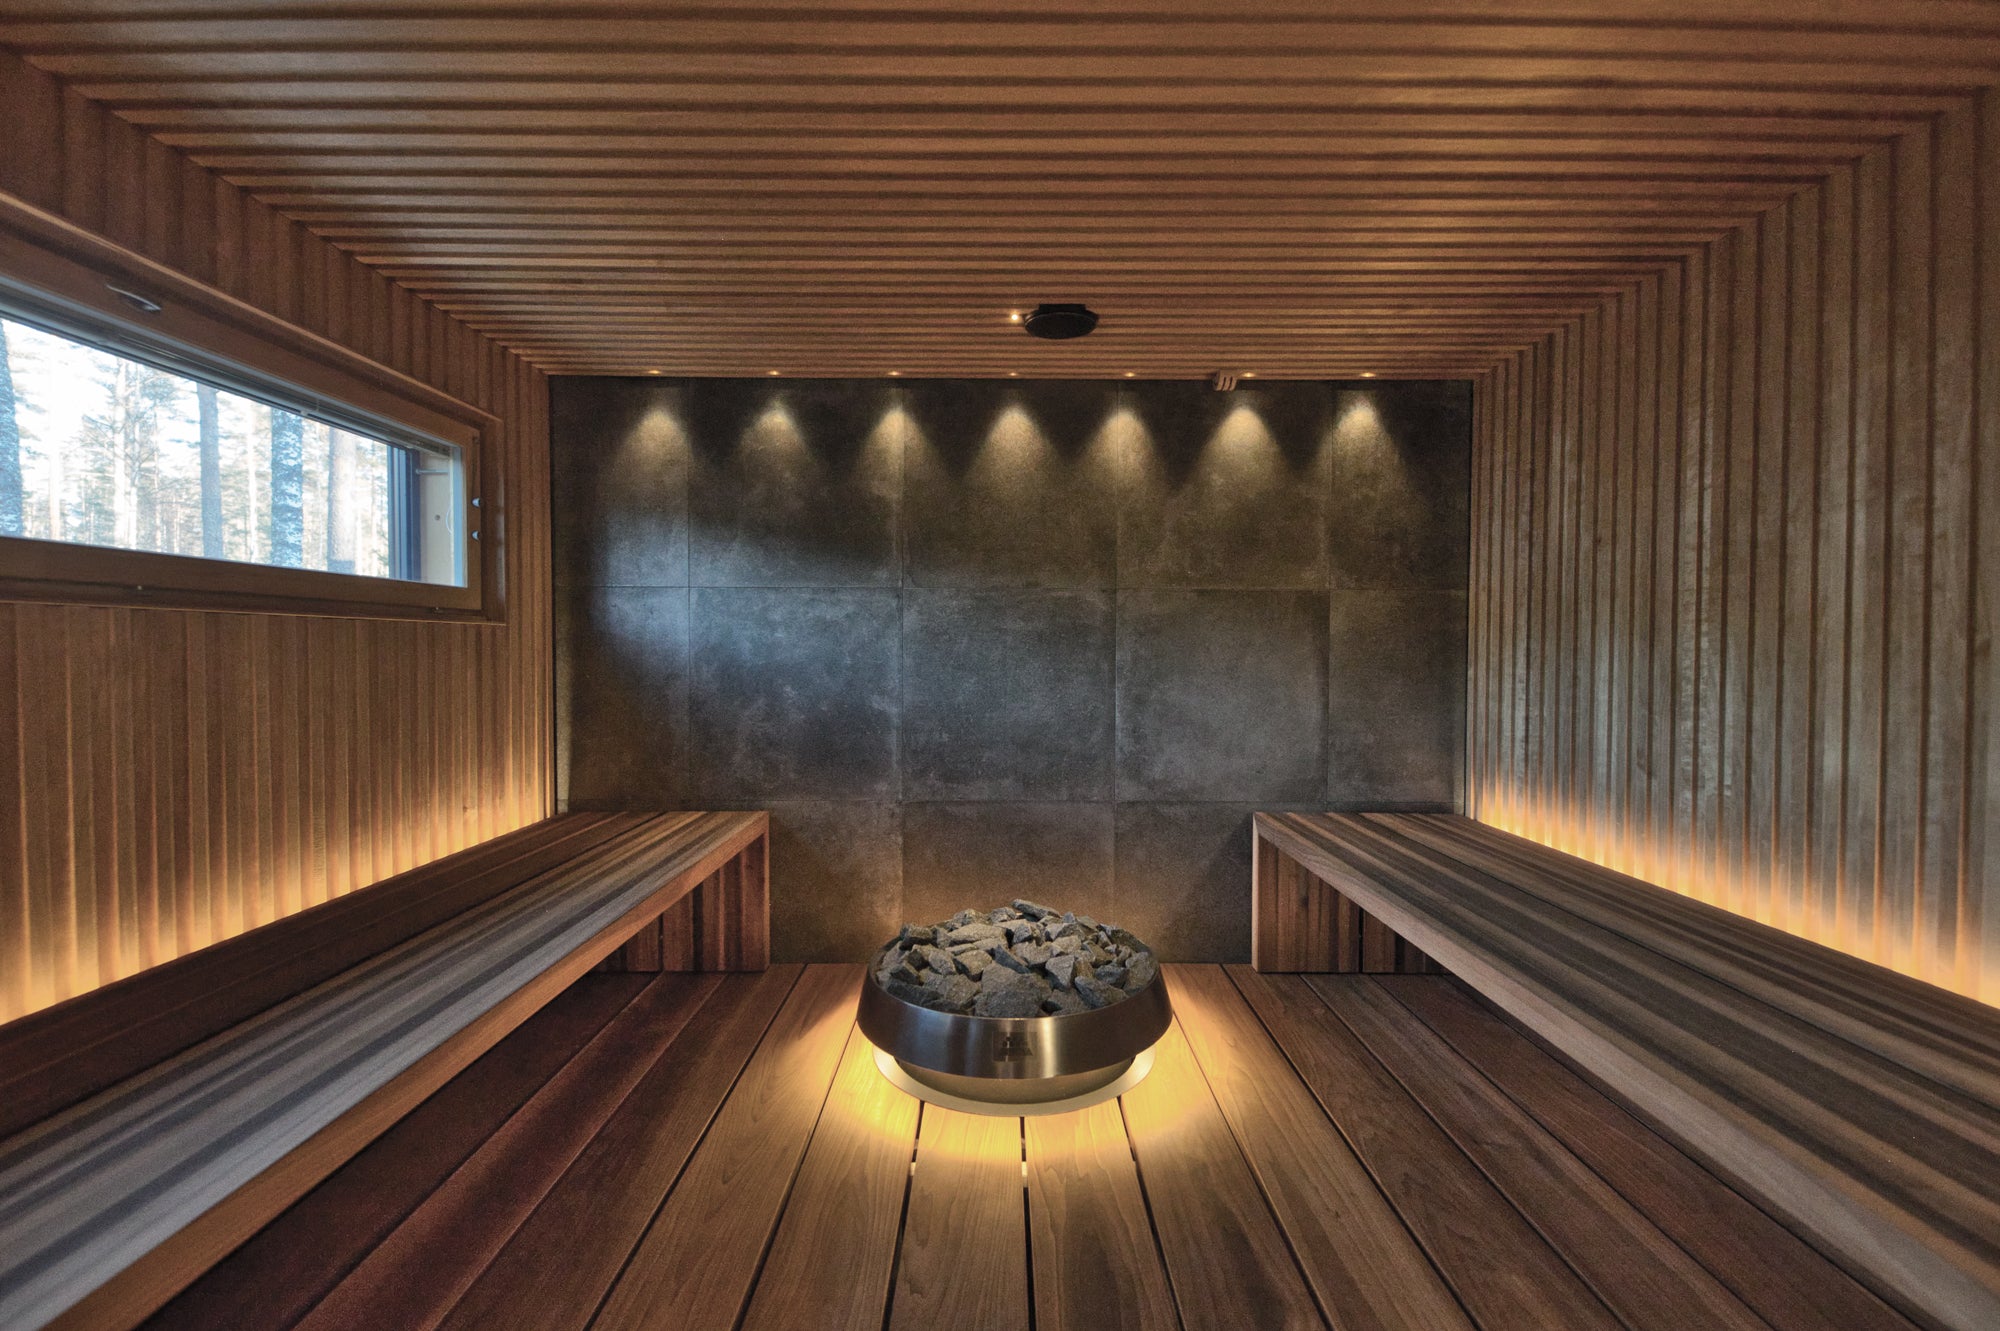 See your sauna in a new light